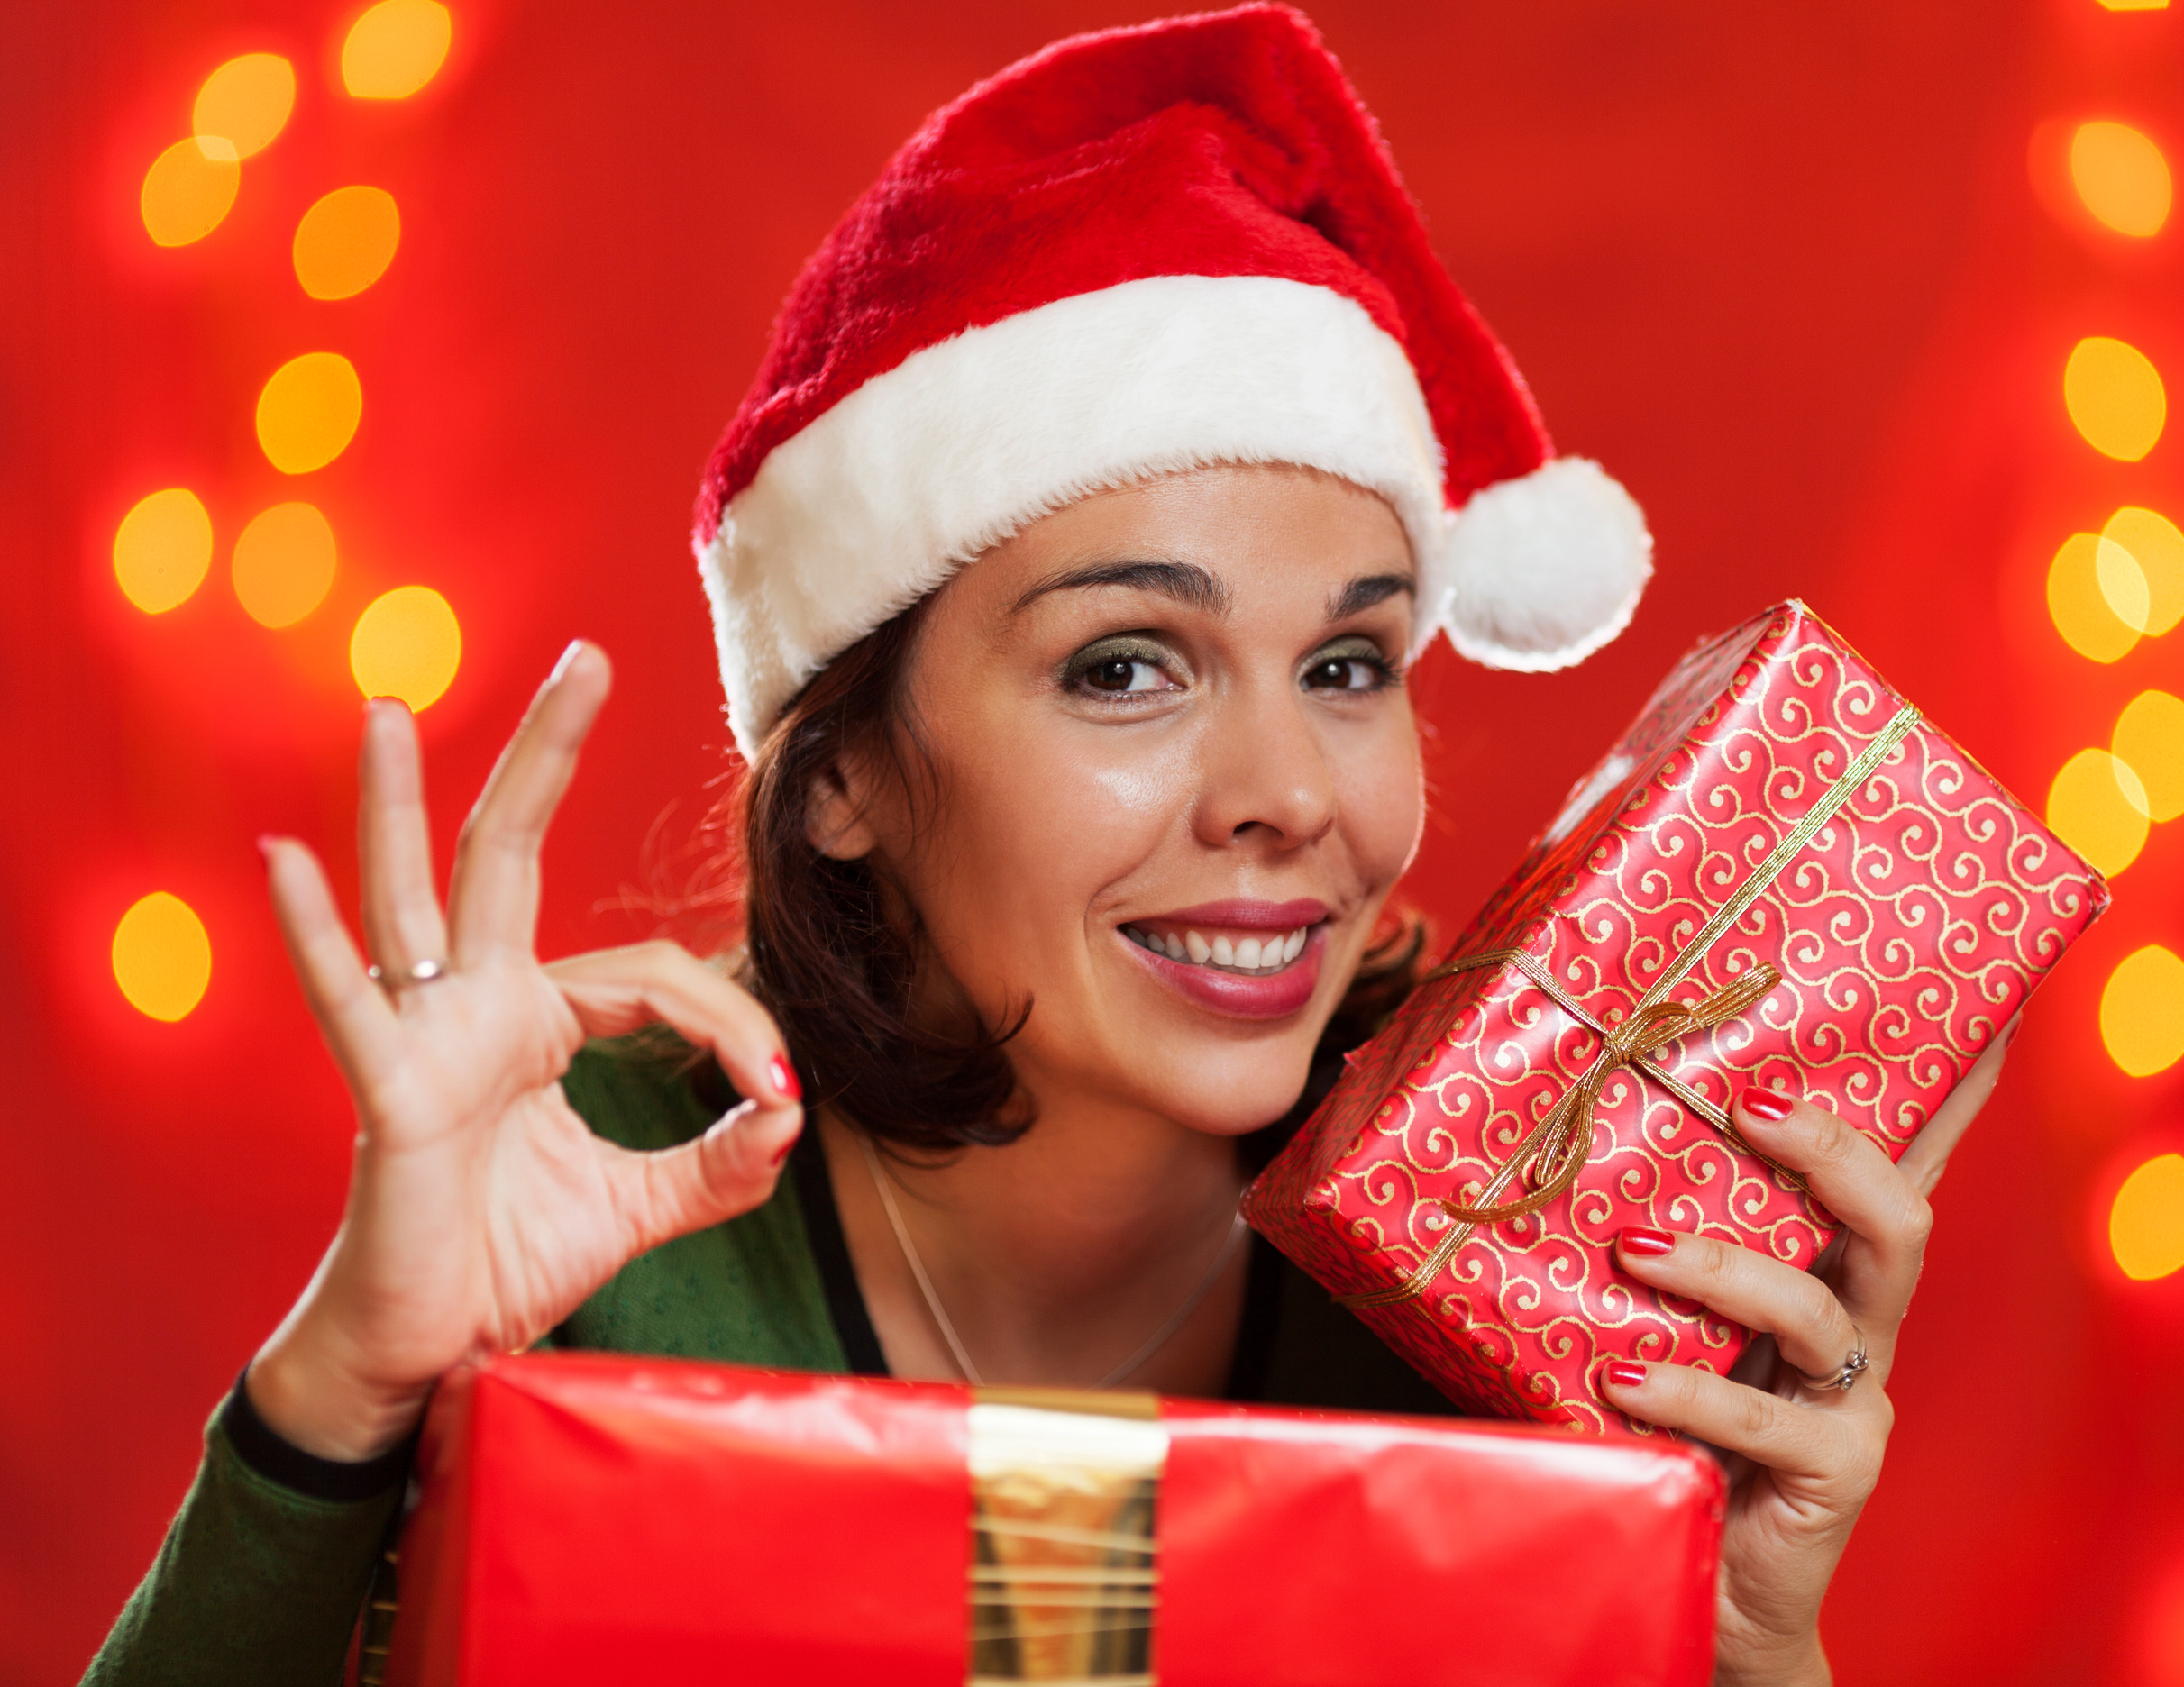 Buy great Christmas gifts for low prices